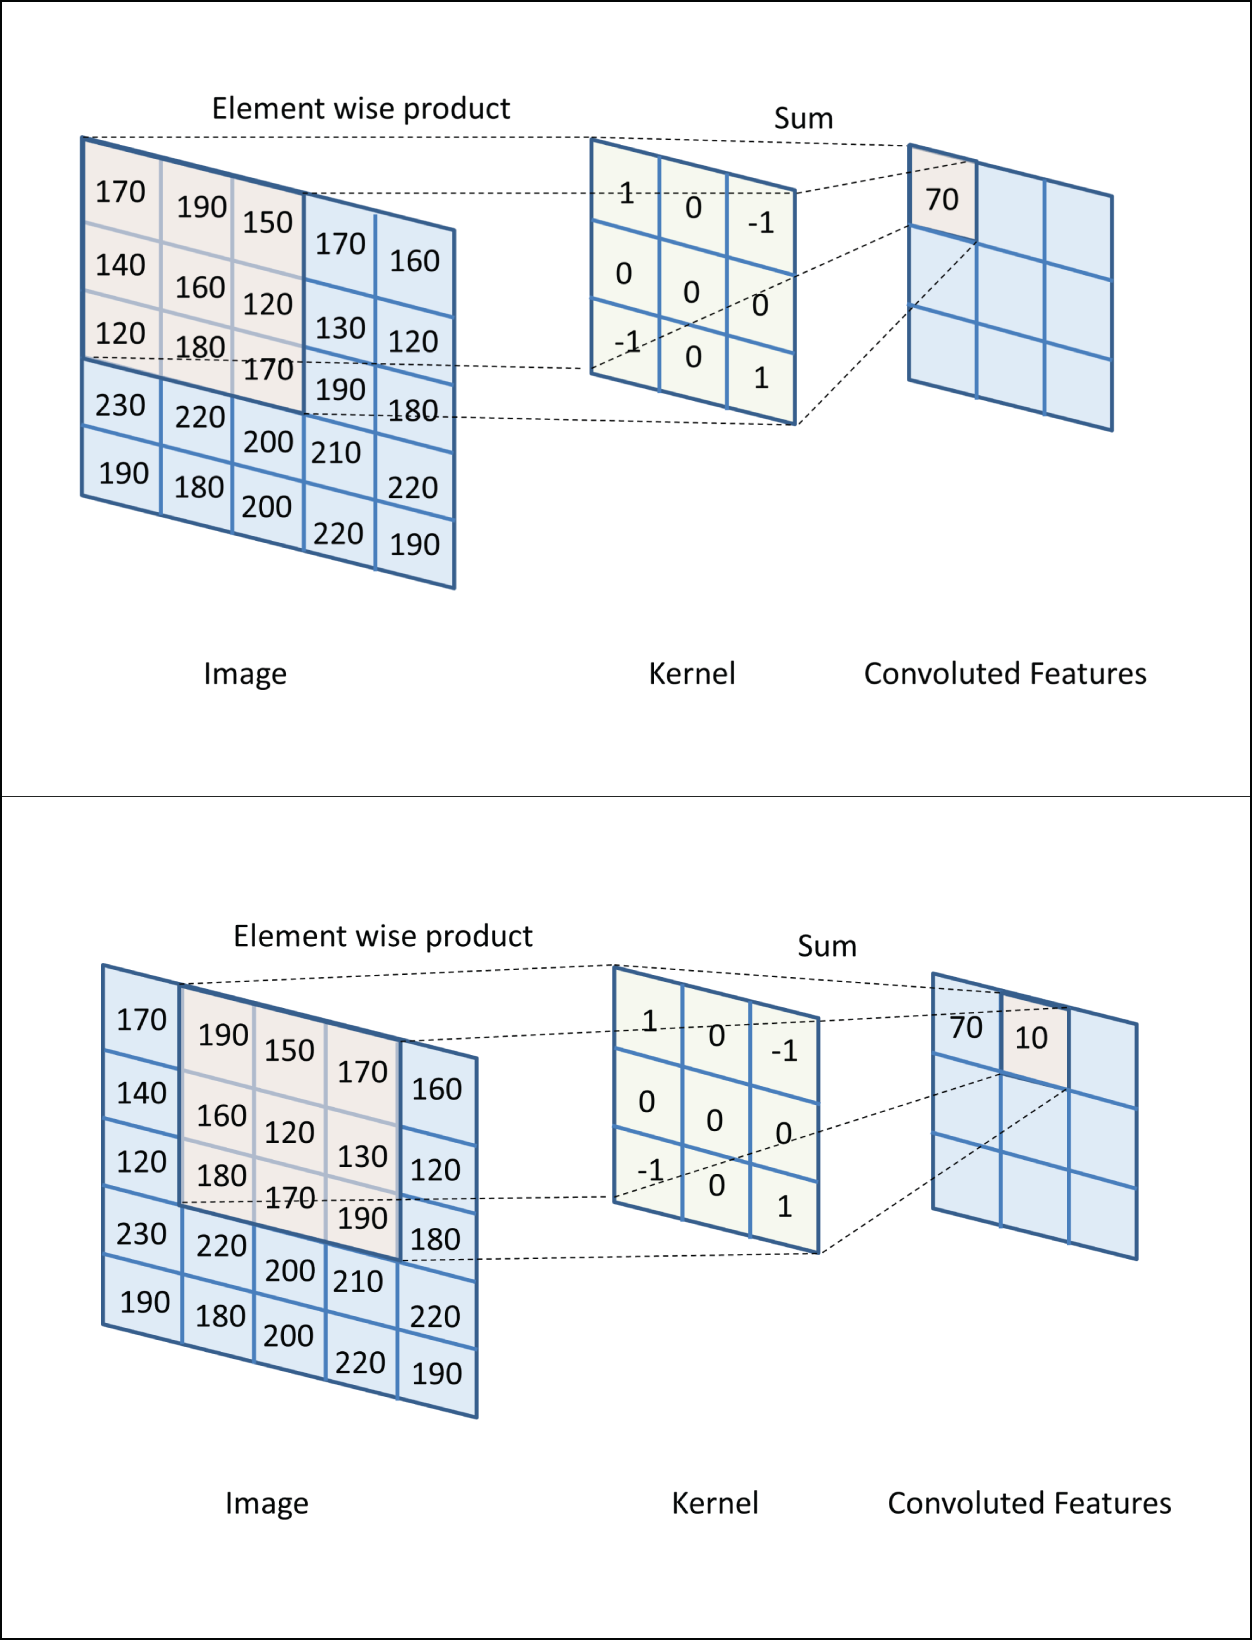 Snapshot of the convolution process of an image and a kernel